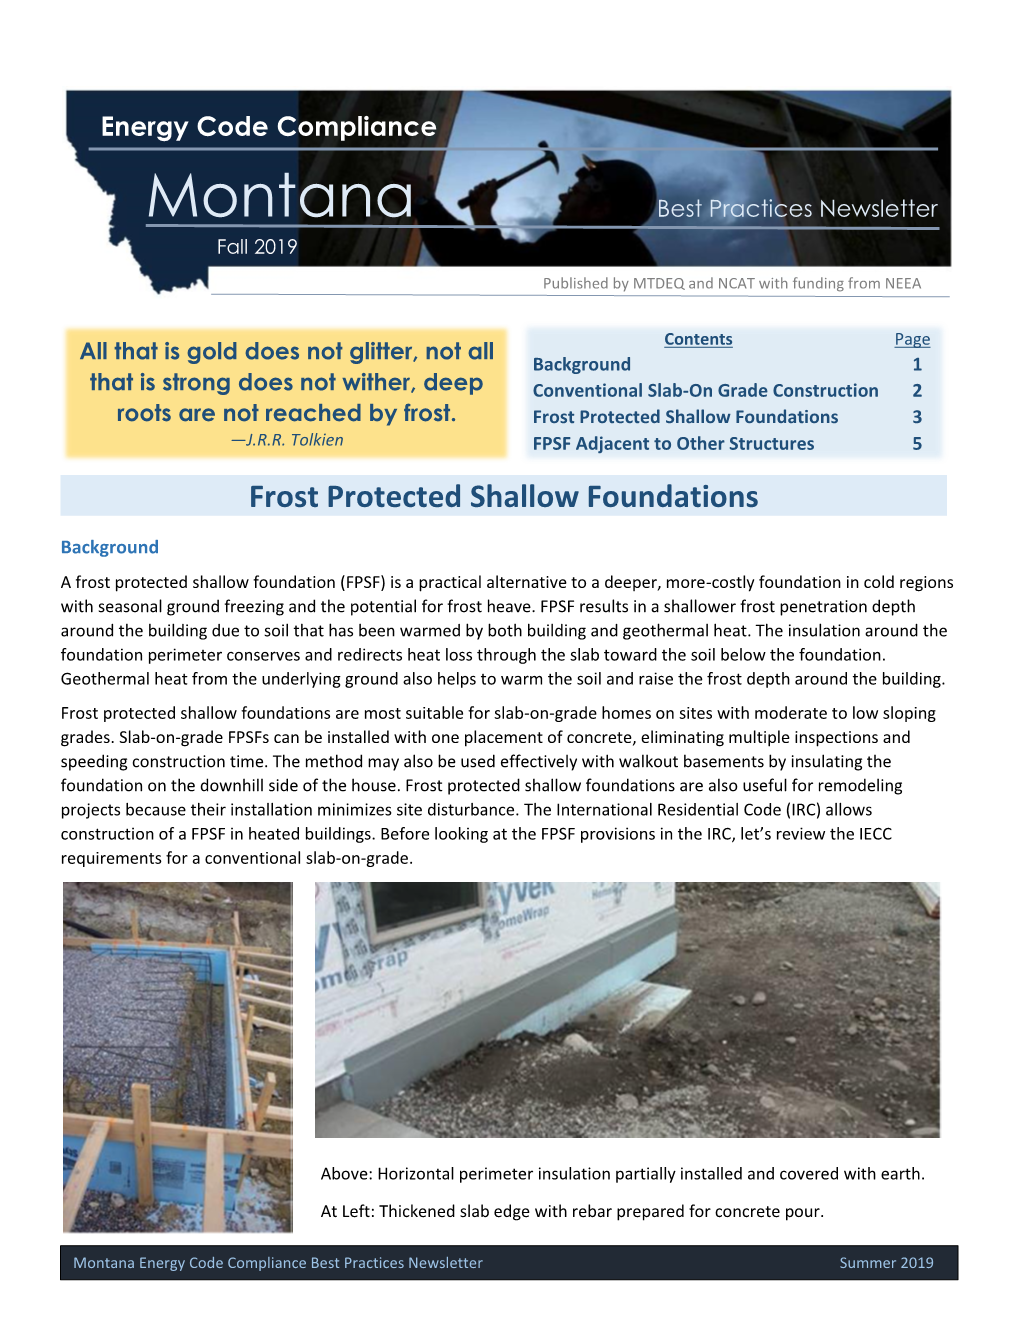 Fall 2019: Frost Protected Shallow Foundations